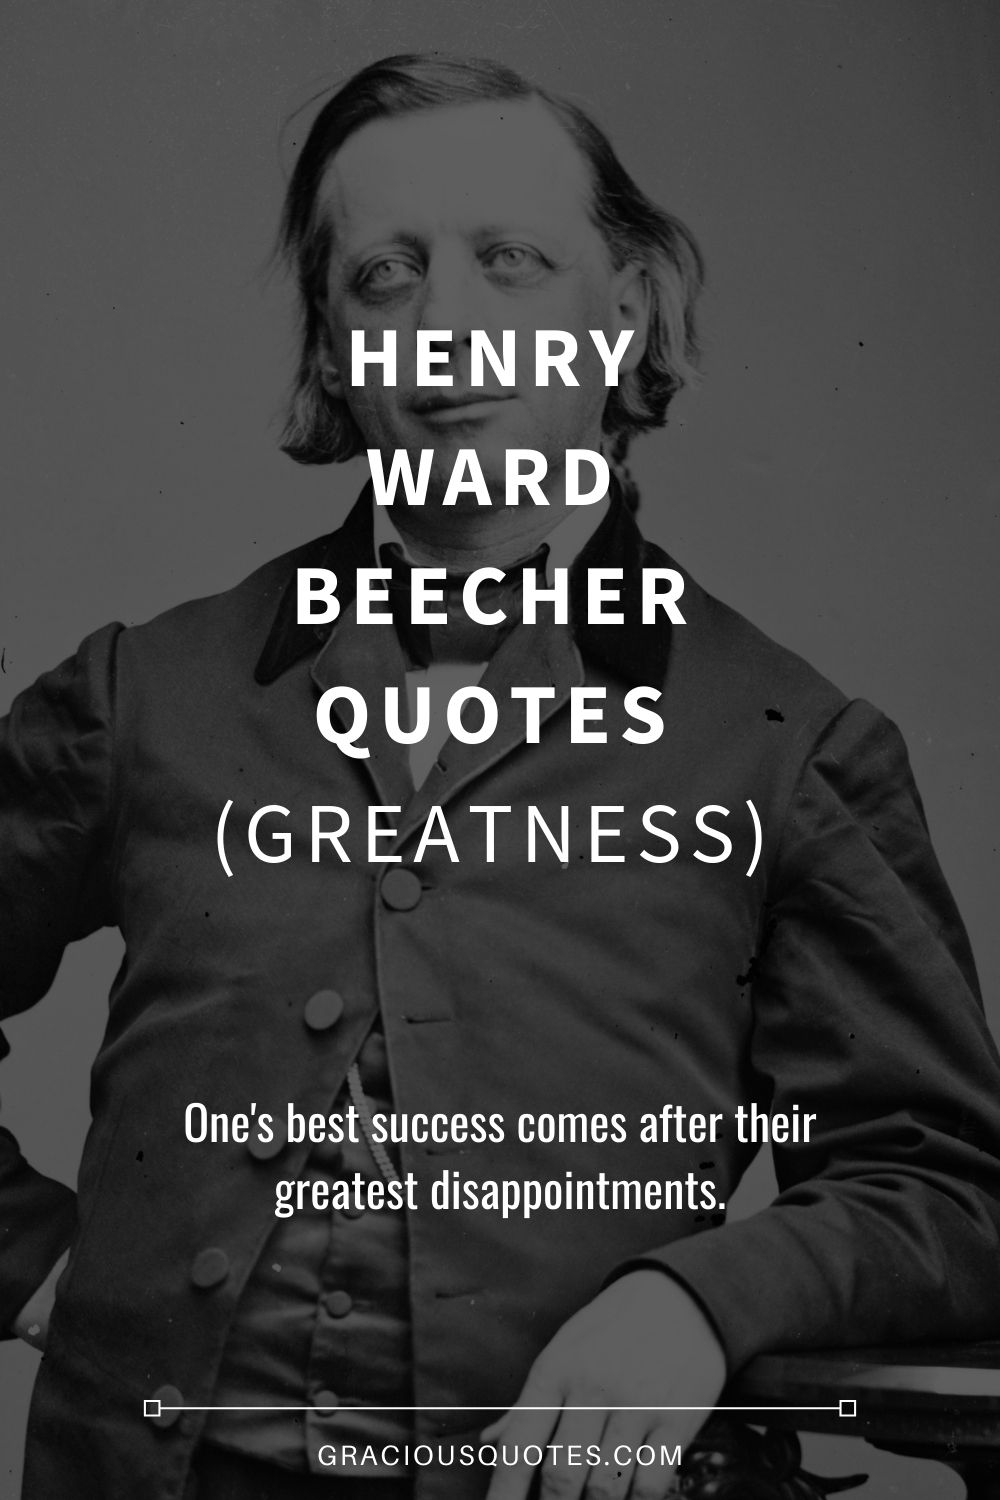 Henry Ward Beecher Quotes (GREATNESS) - Gracious Quotes